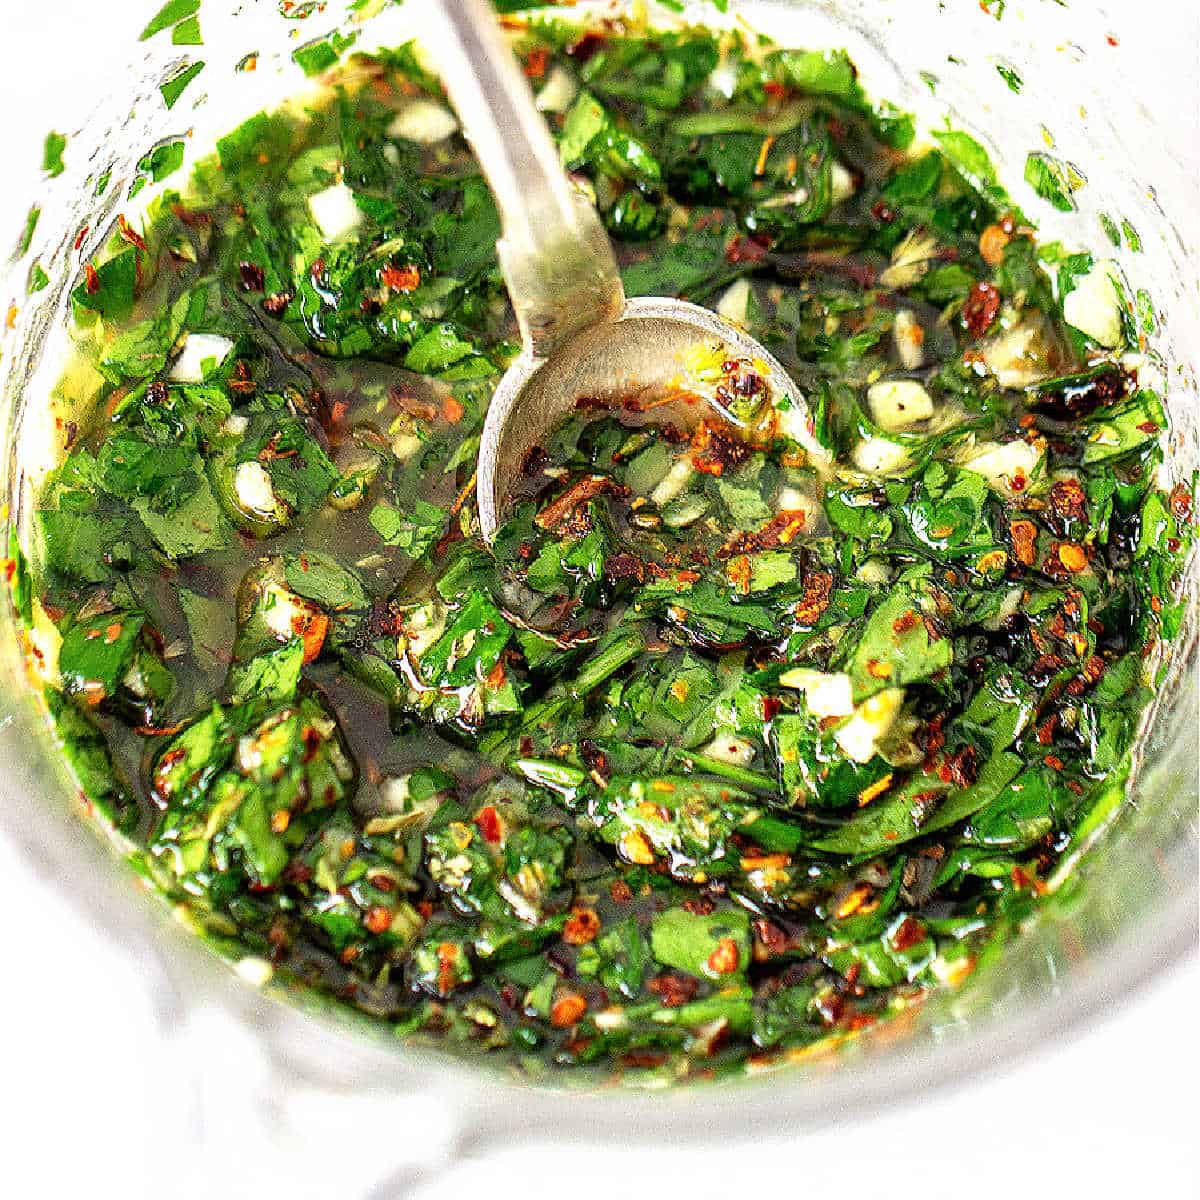 Top view of glass jar with chimichurri sauce and silver spoon, white surface.